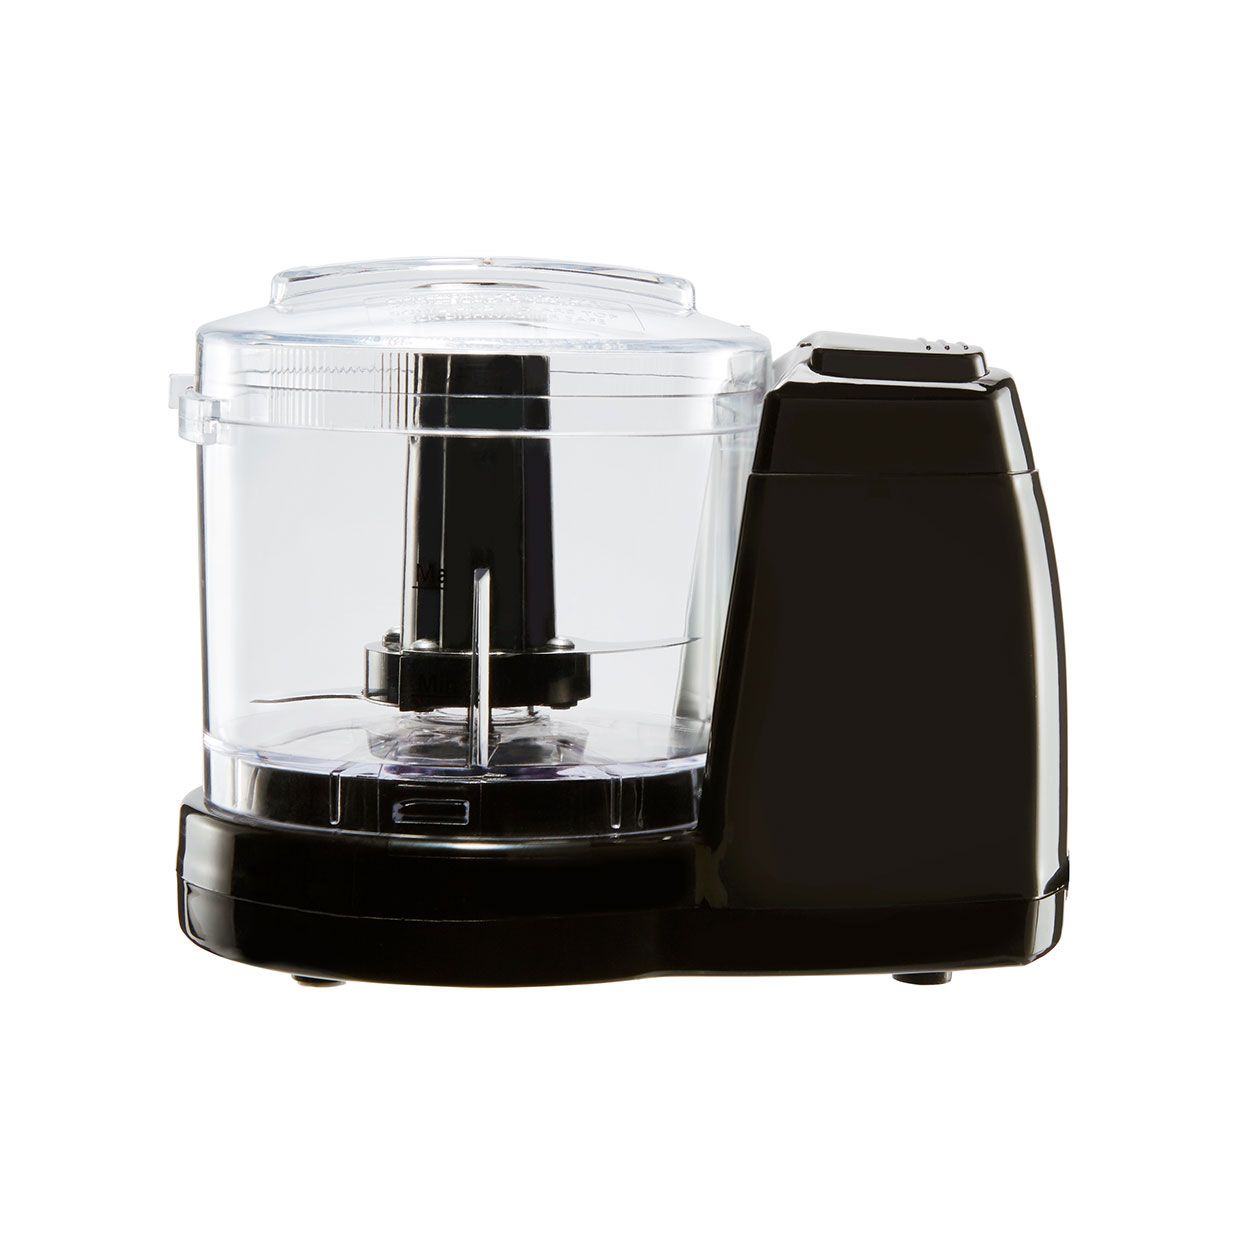 10 Best Mini Food Processors For 2019 According To Reviews Shape